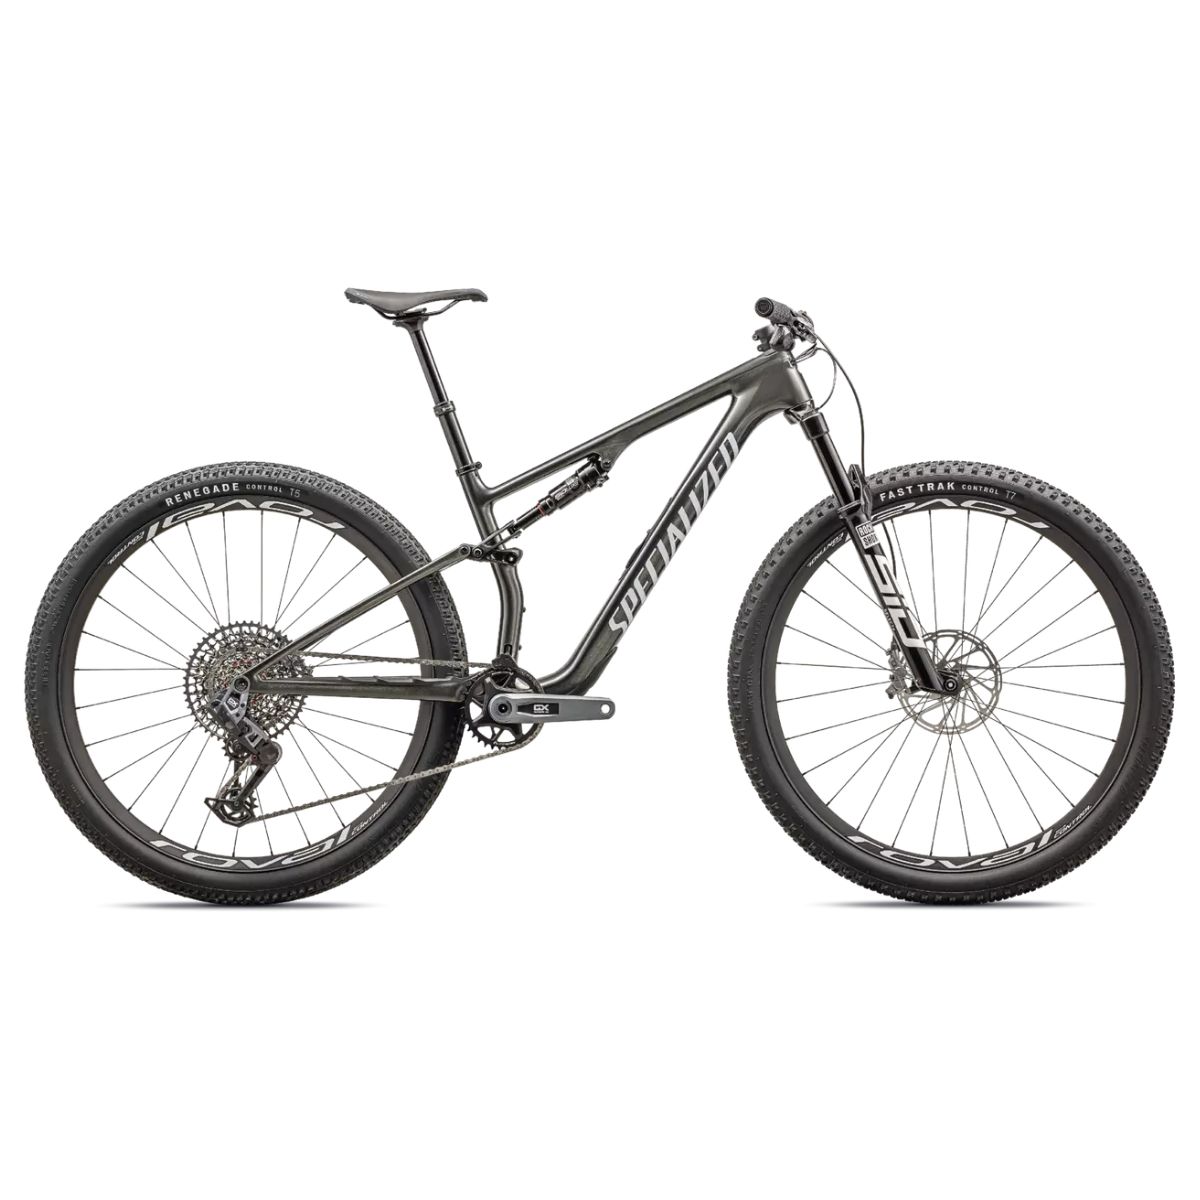 Specialized Epic 8 Expert